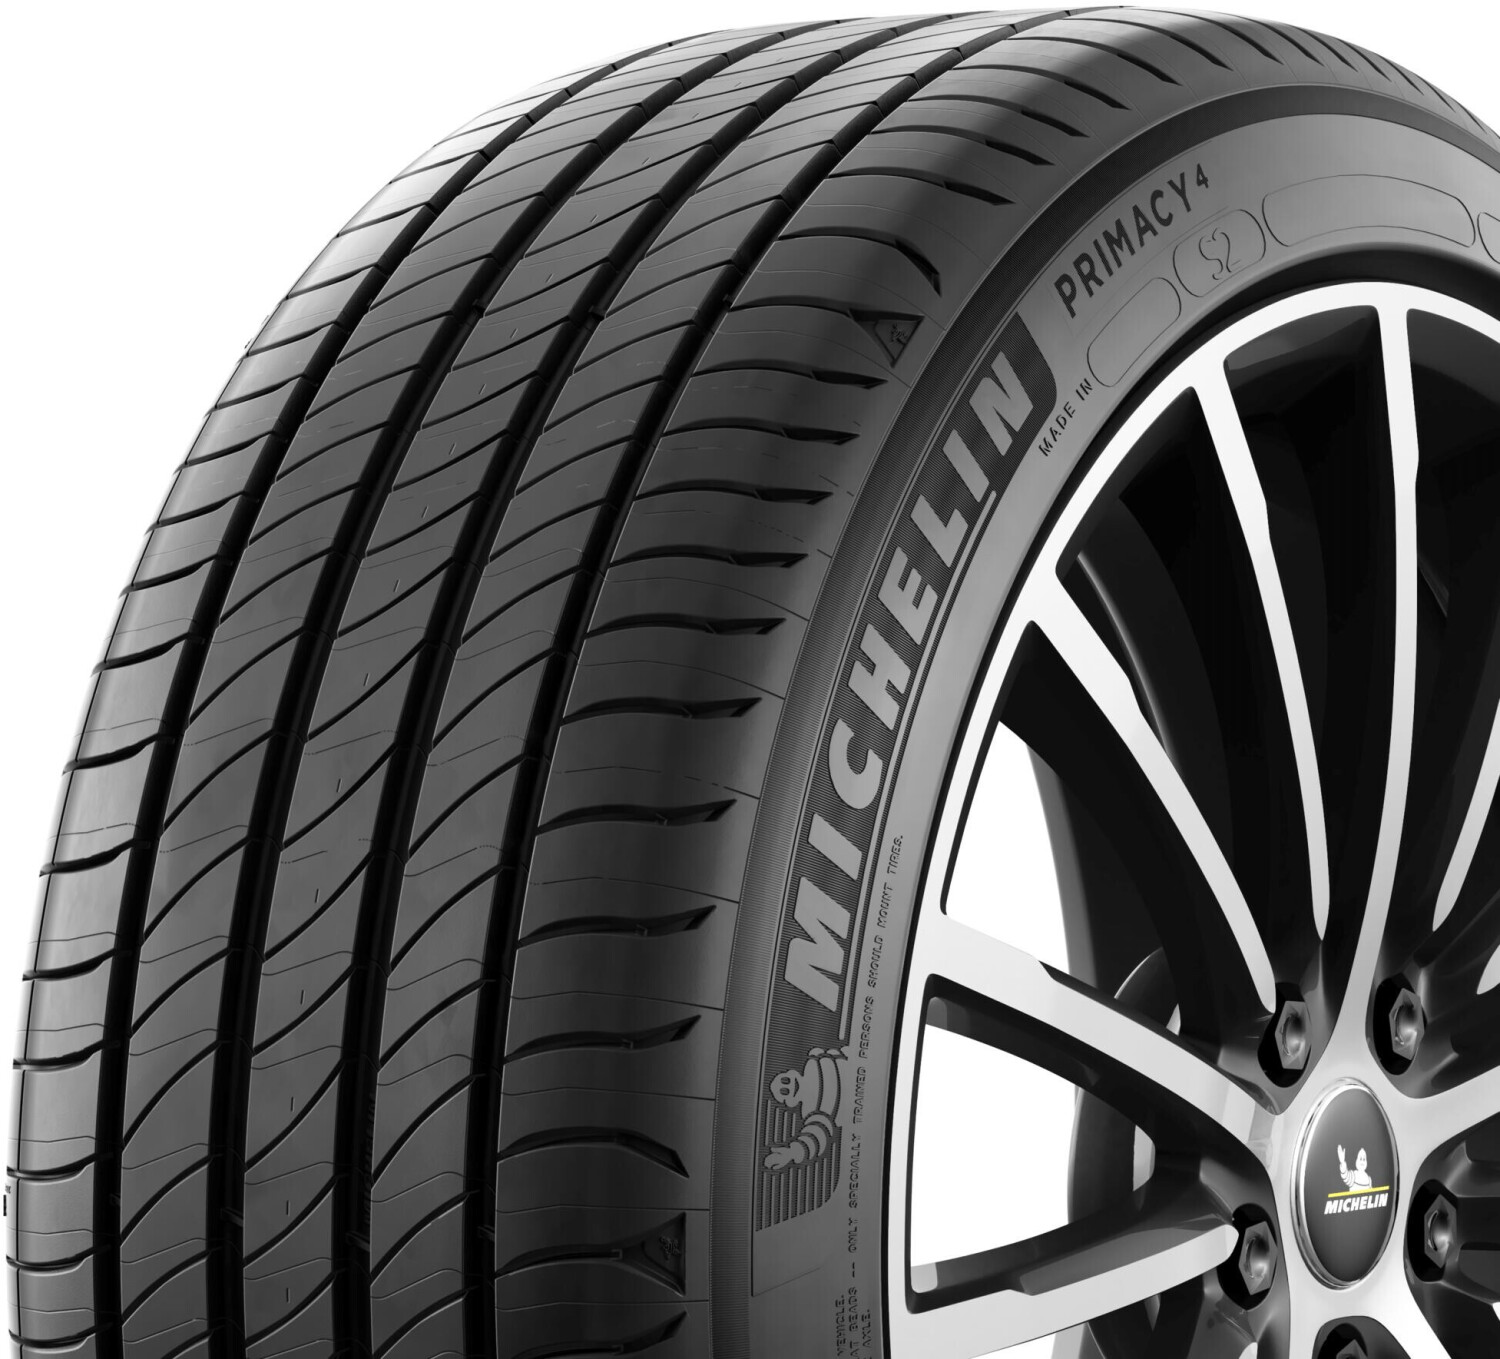 Buy Michelin Primacy 4 225/45 R17 94V XL S1 from £108.51 (Today) – Best  Deals on